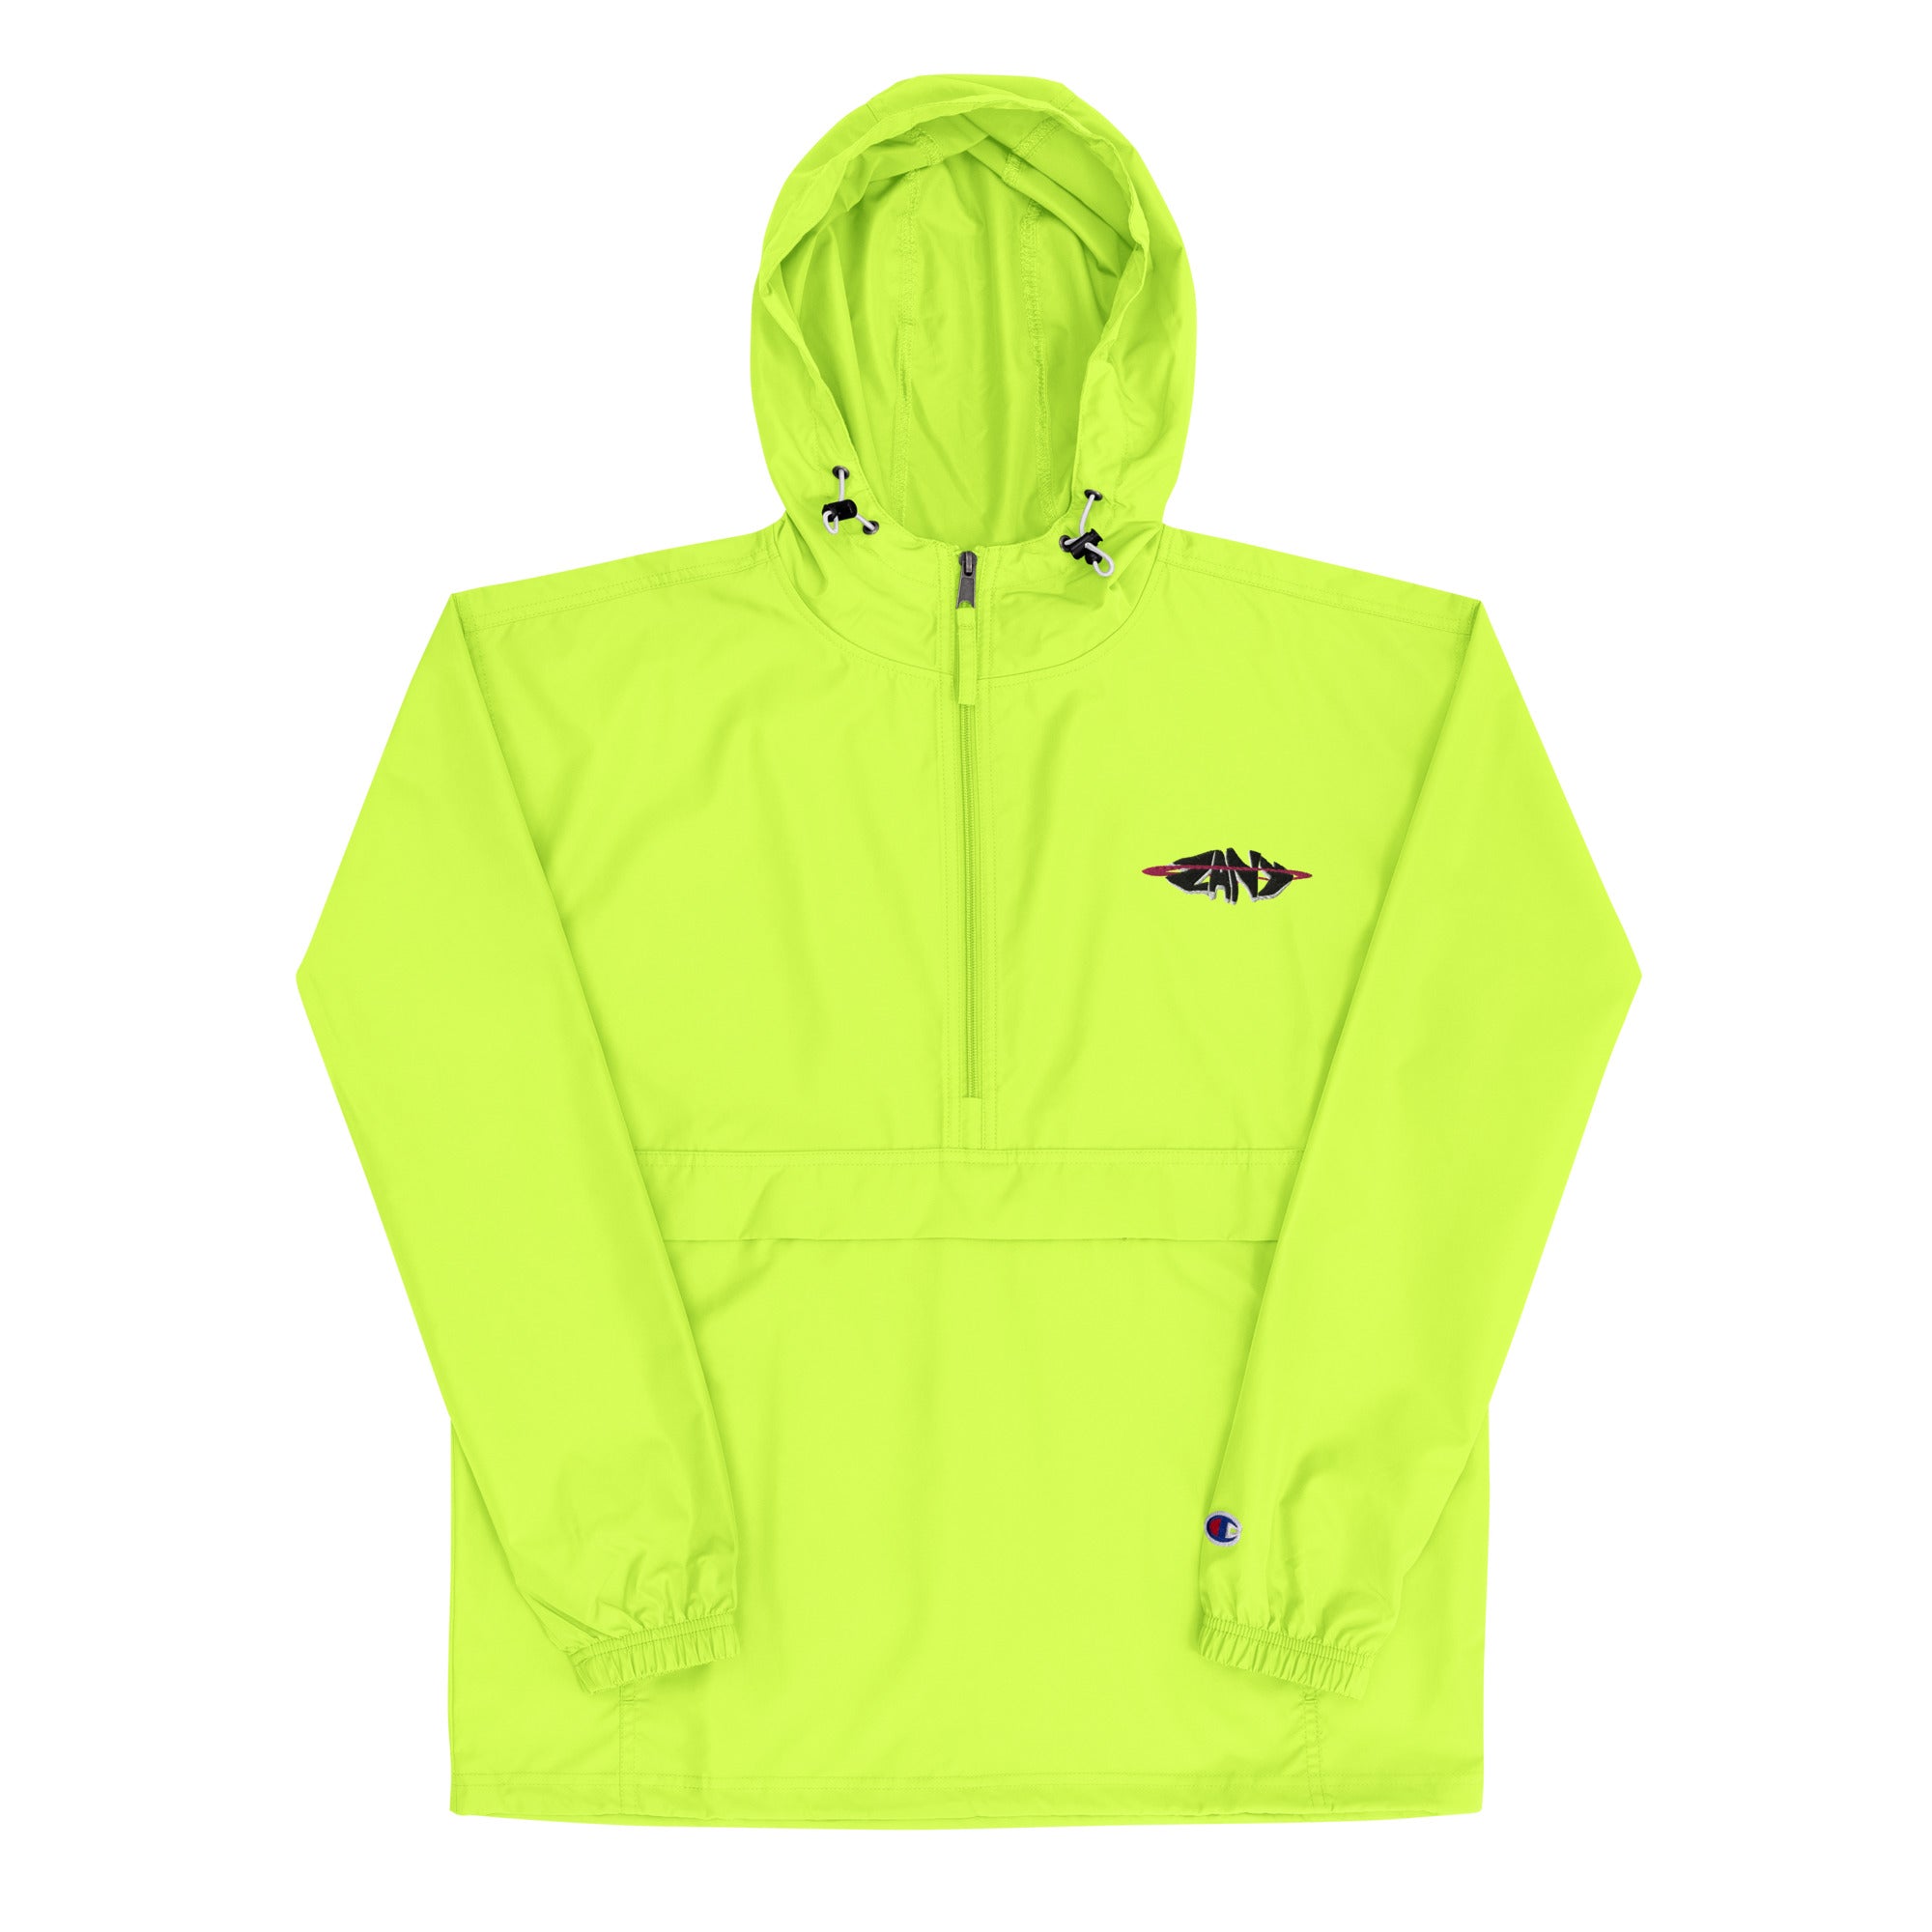 embroidered-champion-packable-jacket-safety-green-front-65b13a4b1a064.jpg